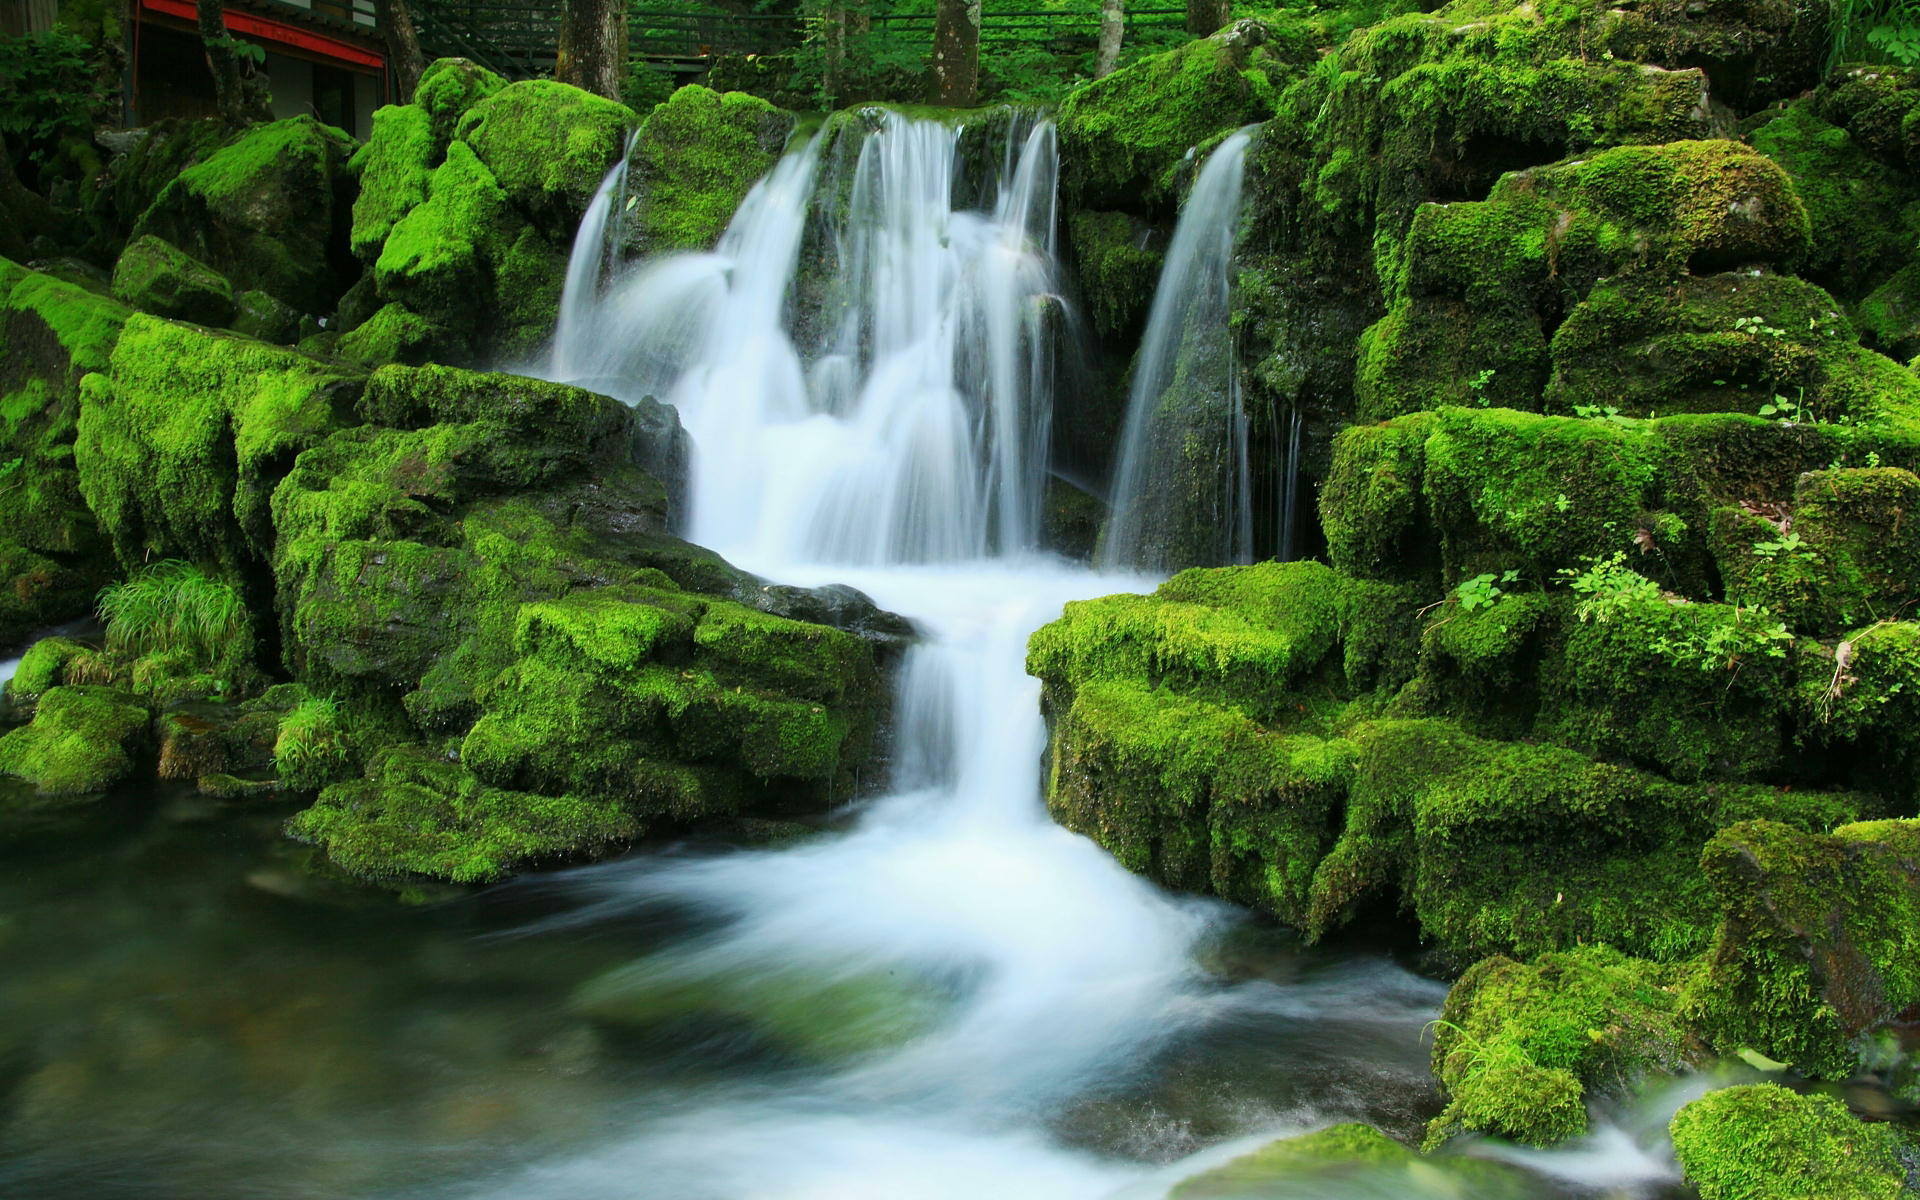 Wallpaper for Mobile - Minimalist Nature Waterfall - HeroWall Backgrounds